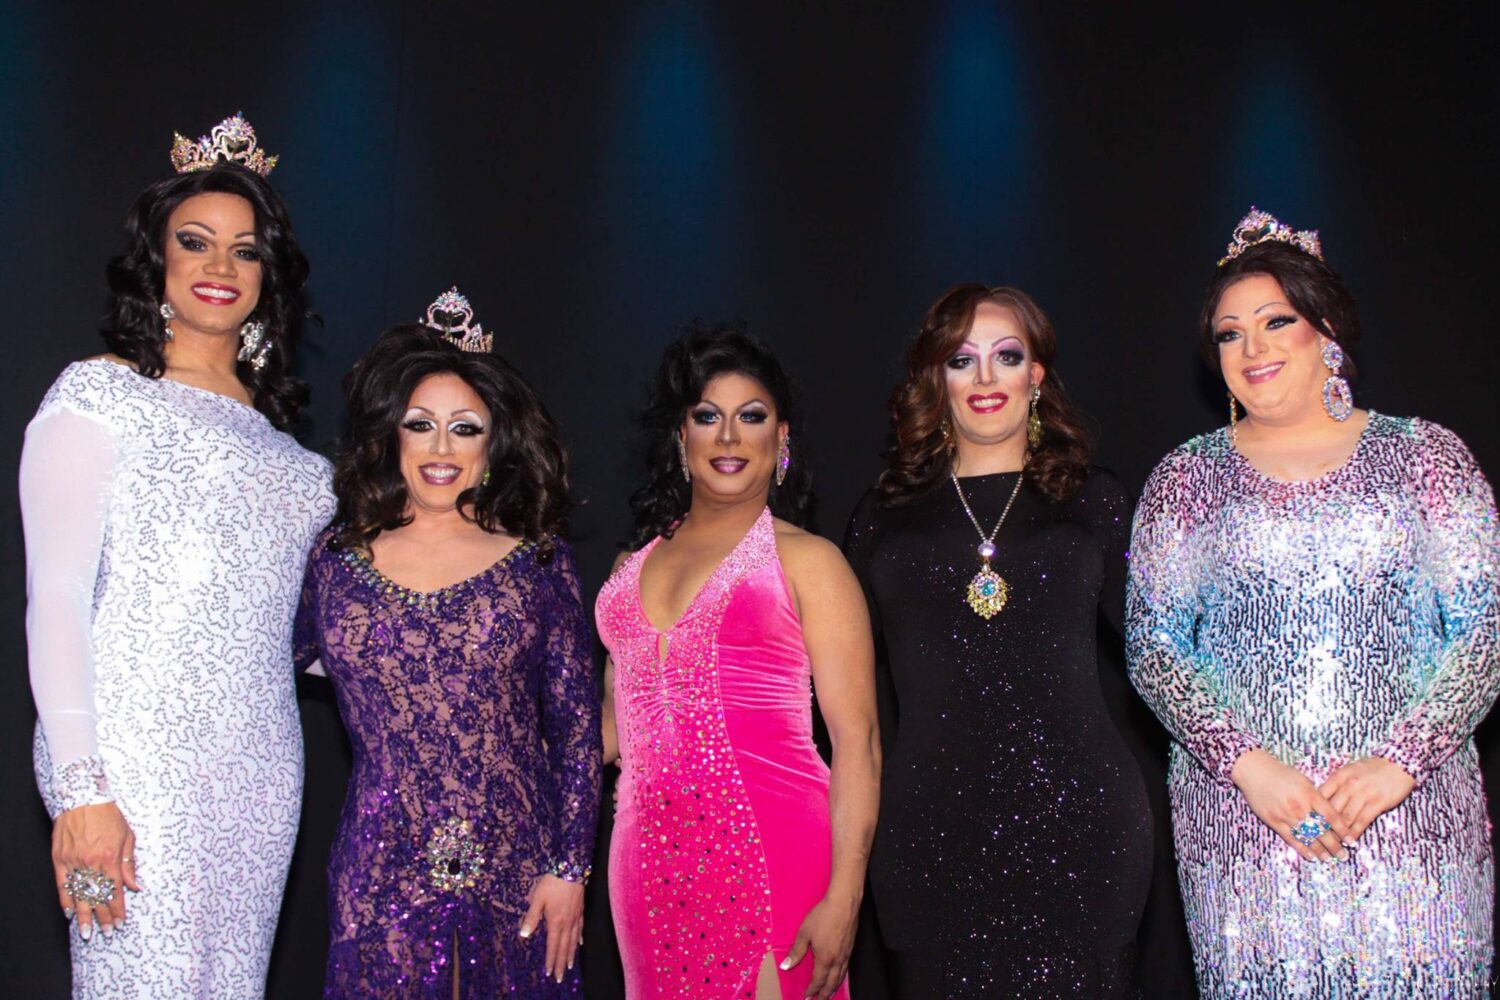 Kiley Dash-West (Miss Gay Columbus America 2015), Mary Nolan (Miss Gay Columbus America 2016), Rosario Garcia (1st Alternate to Miss Gay Columbus America 2016), Valerie Taylor (2nd Alternate to Miss Gay Columbus America 2016) and Amanda Sue (Miss Gay Ohio America 2015) | Miss Gay Columbus America Pageant | Axis Nightclub (Columbus, Ohio) | 3/20/2016 | Photo by Rude Photography